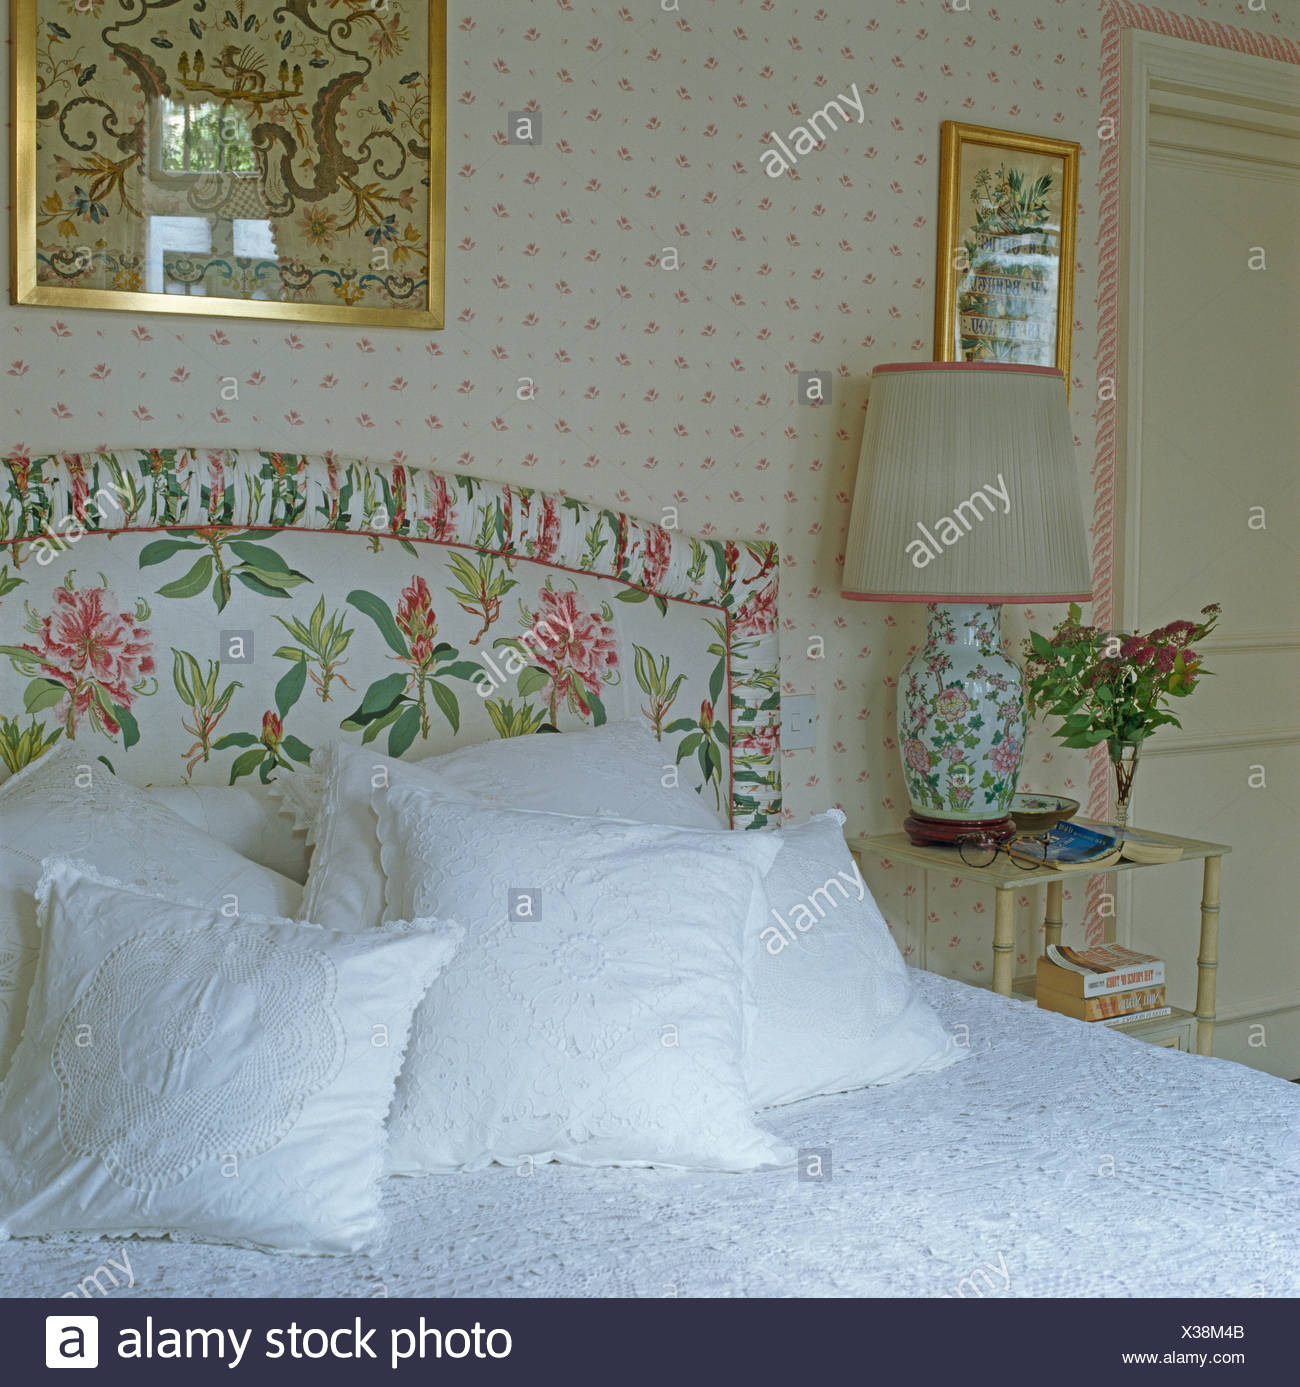 White Lace Edged Cushions On Bed With Upholstered Floral